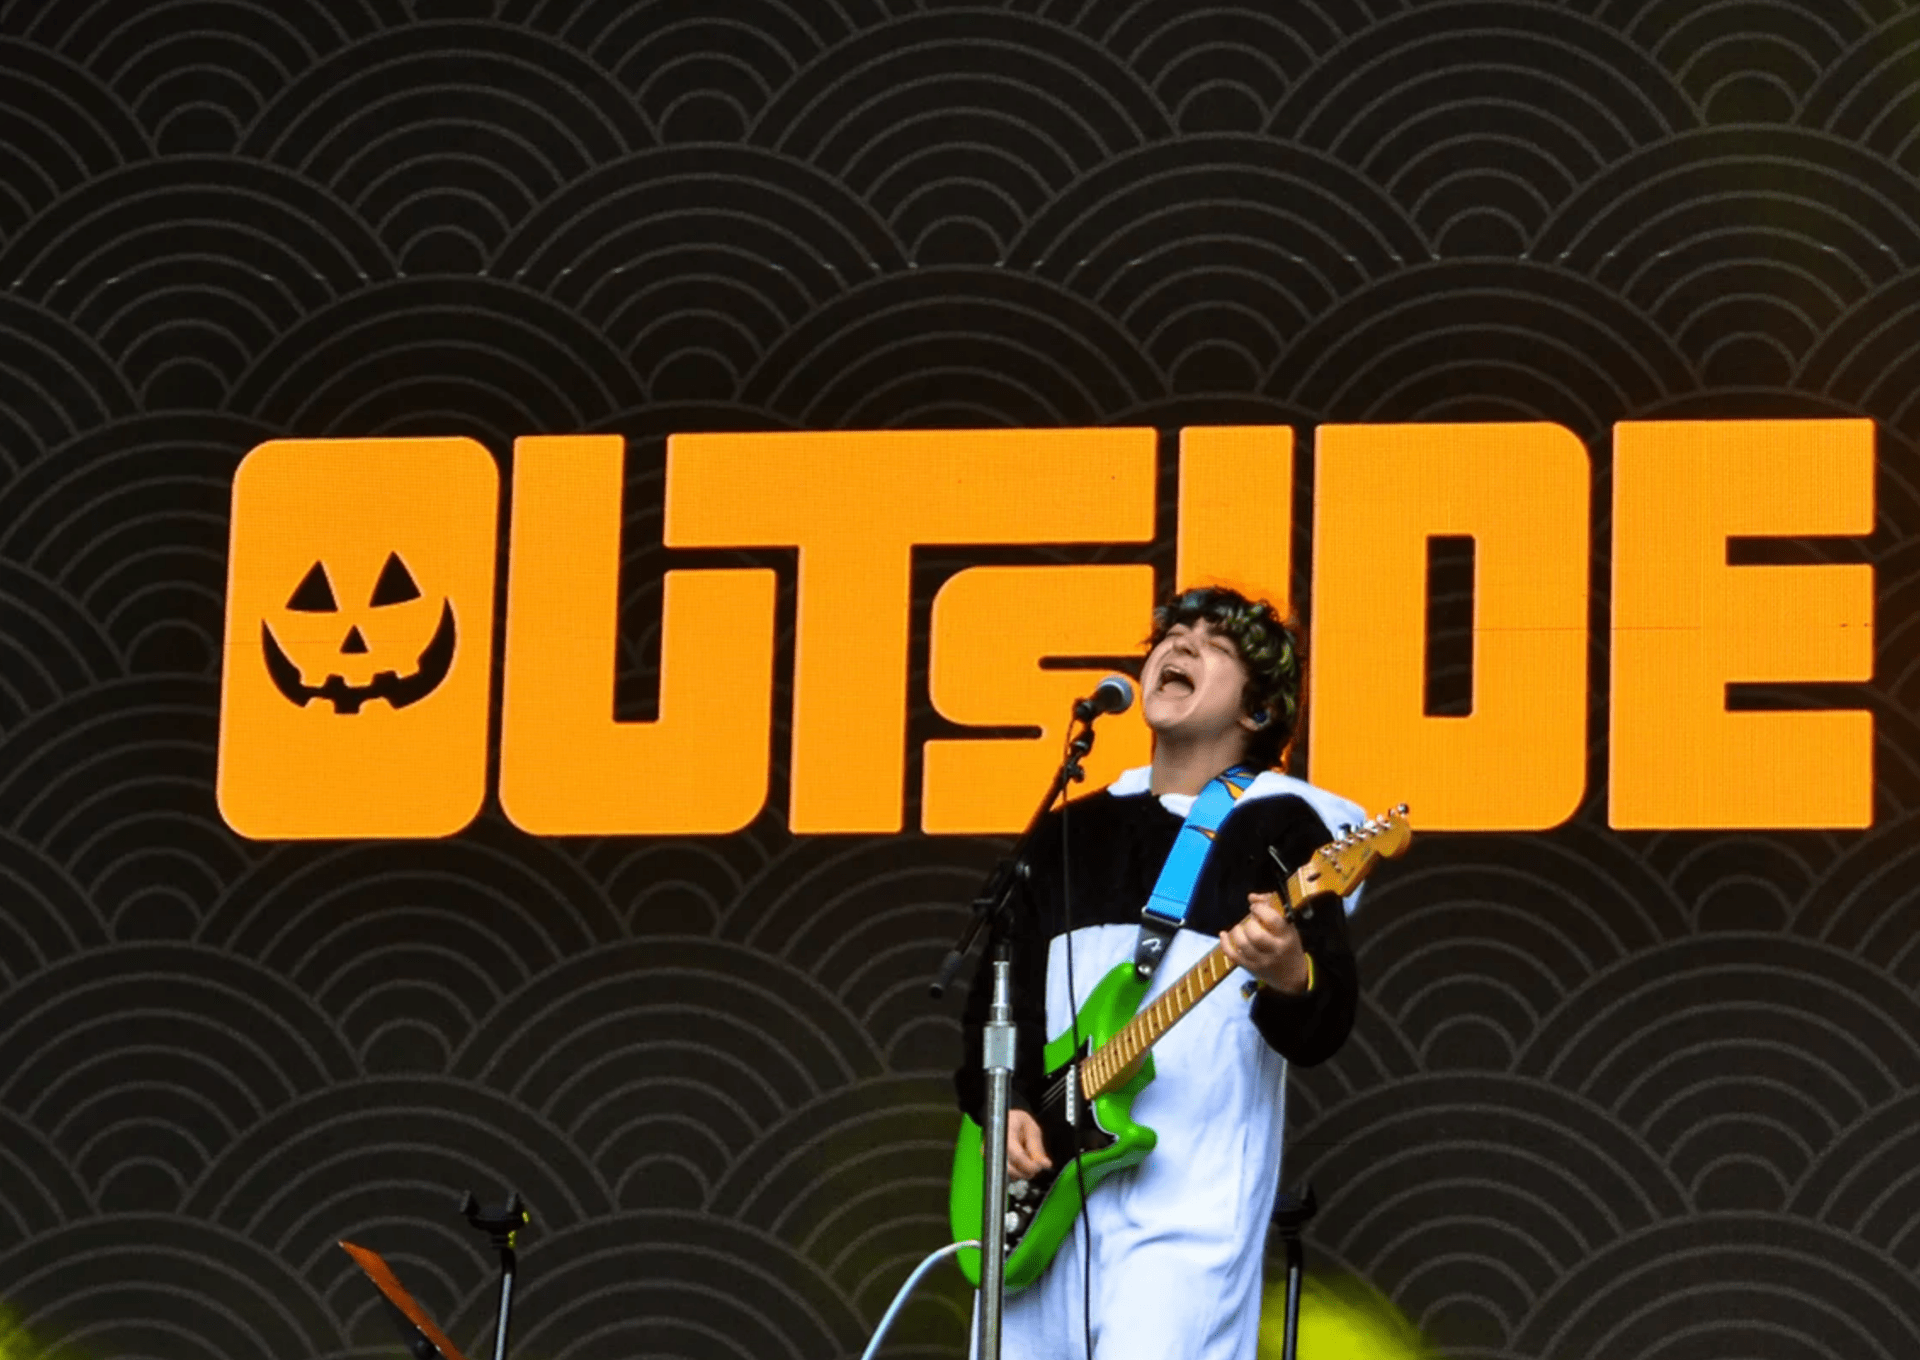 a singer holding a guitar in front of a large sign that says outside